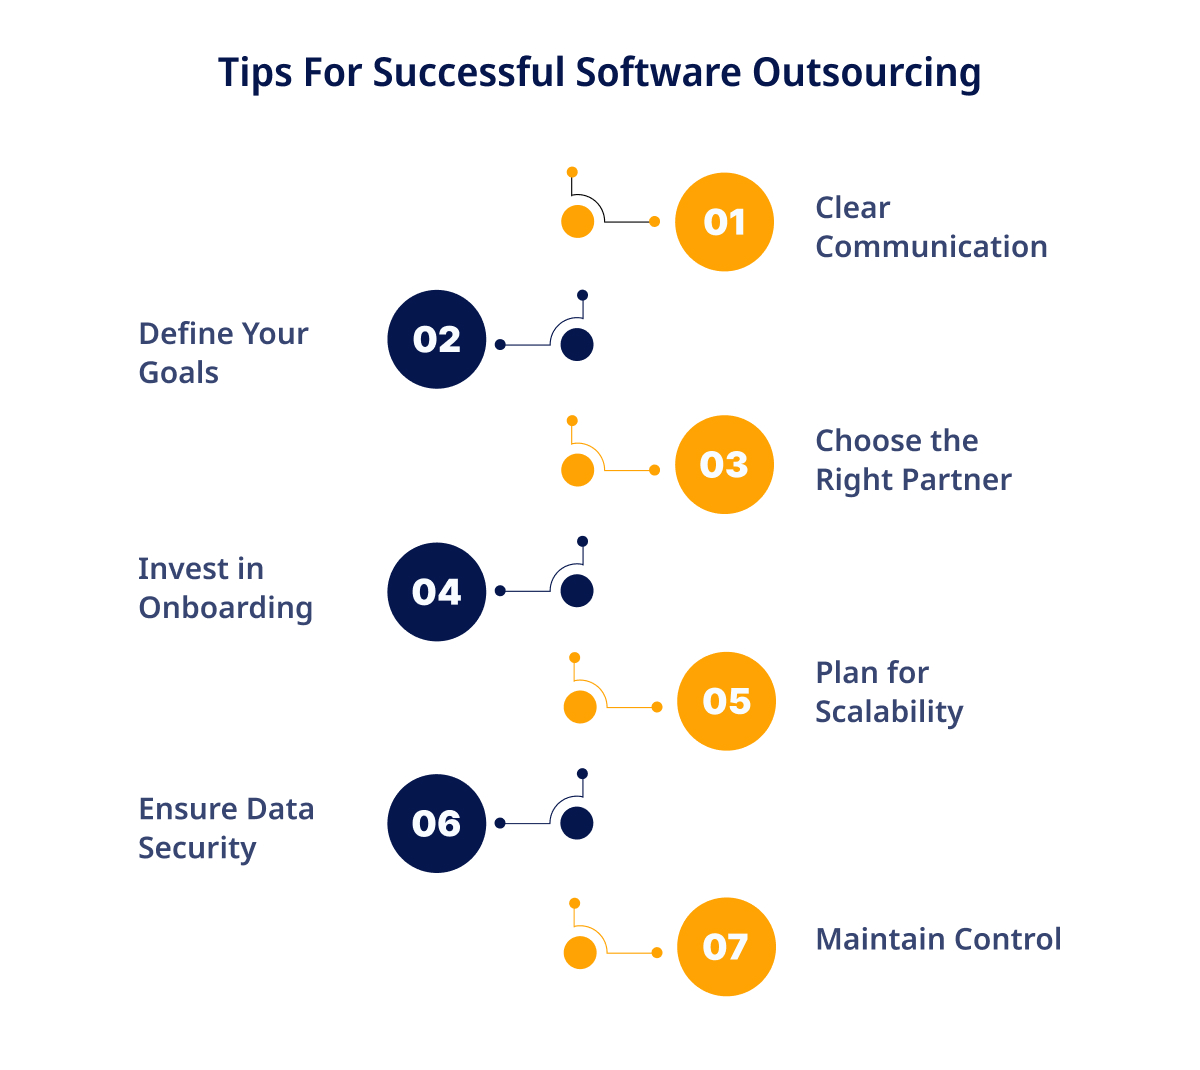 Tips For Successful Software Outsourcing